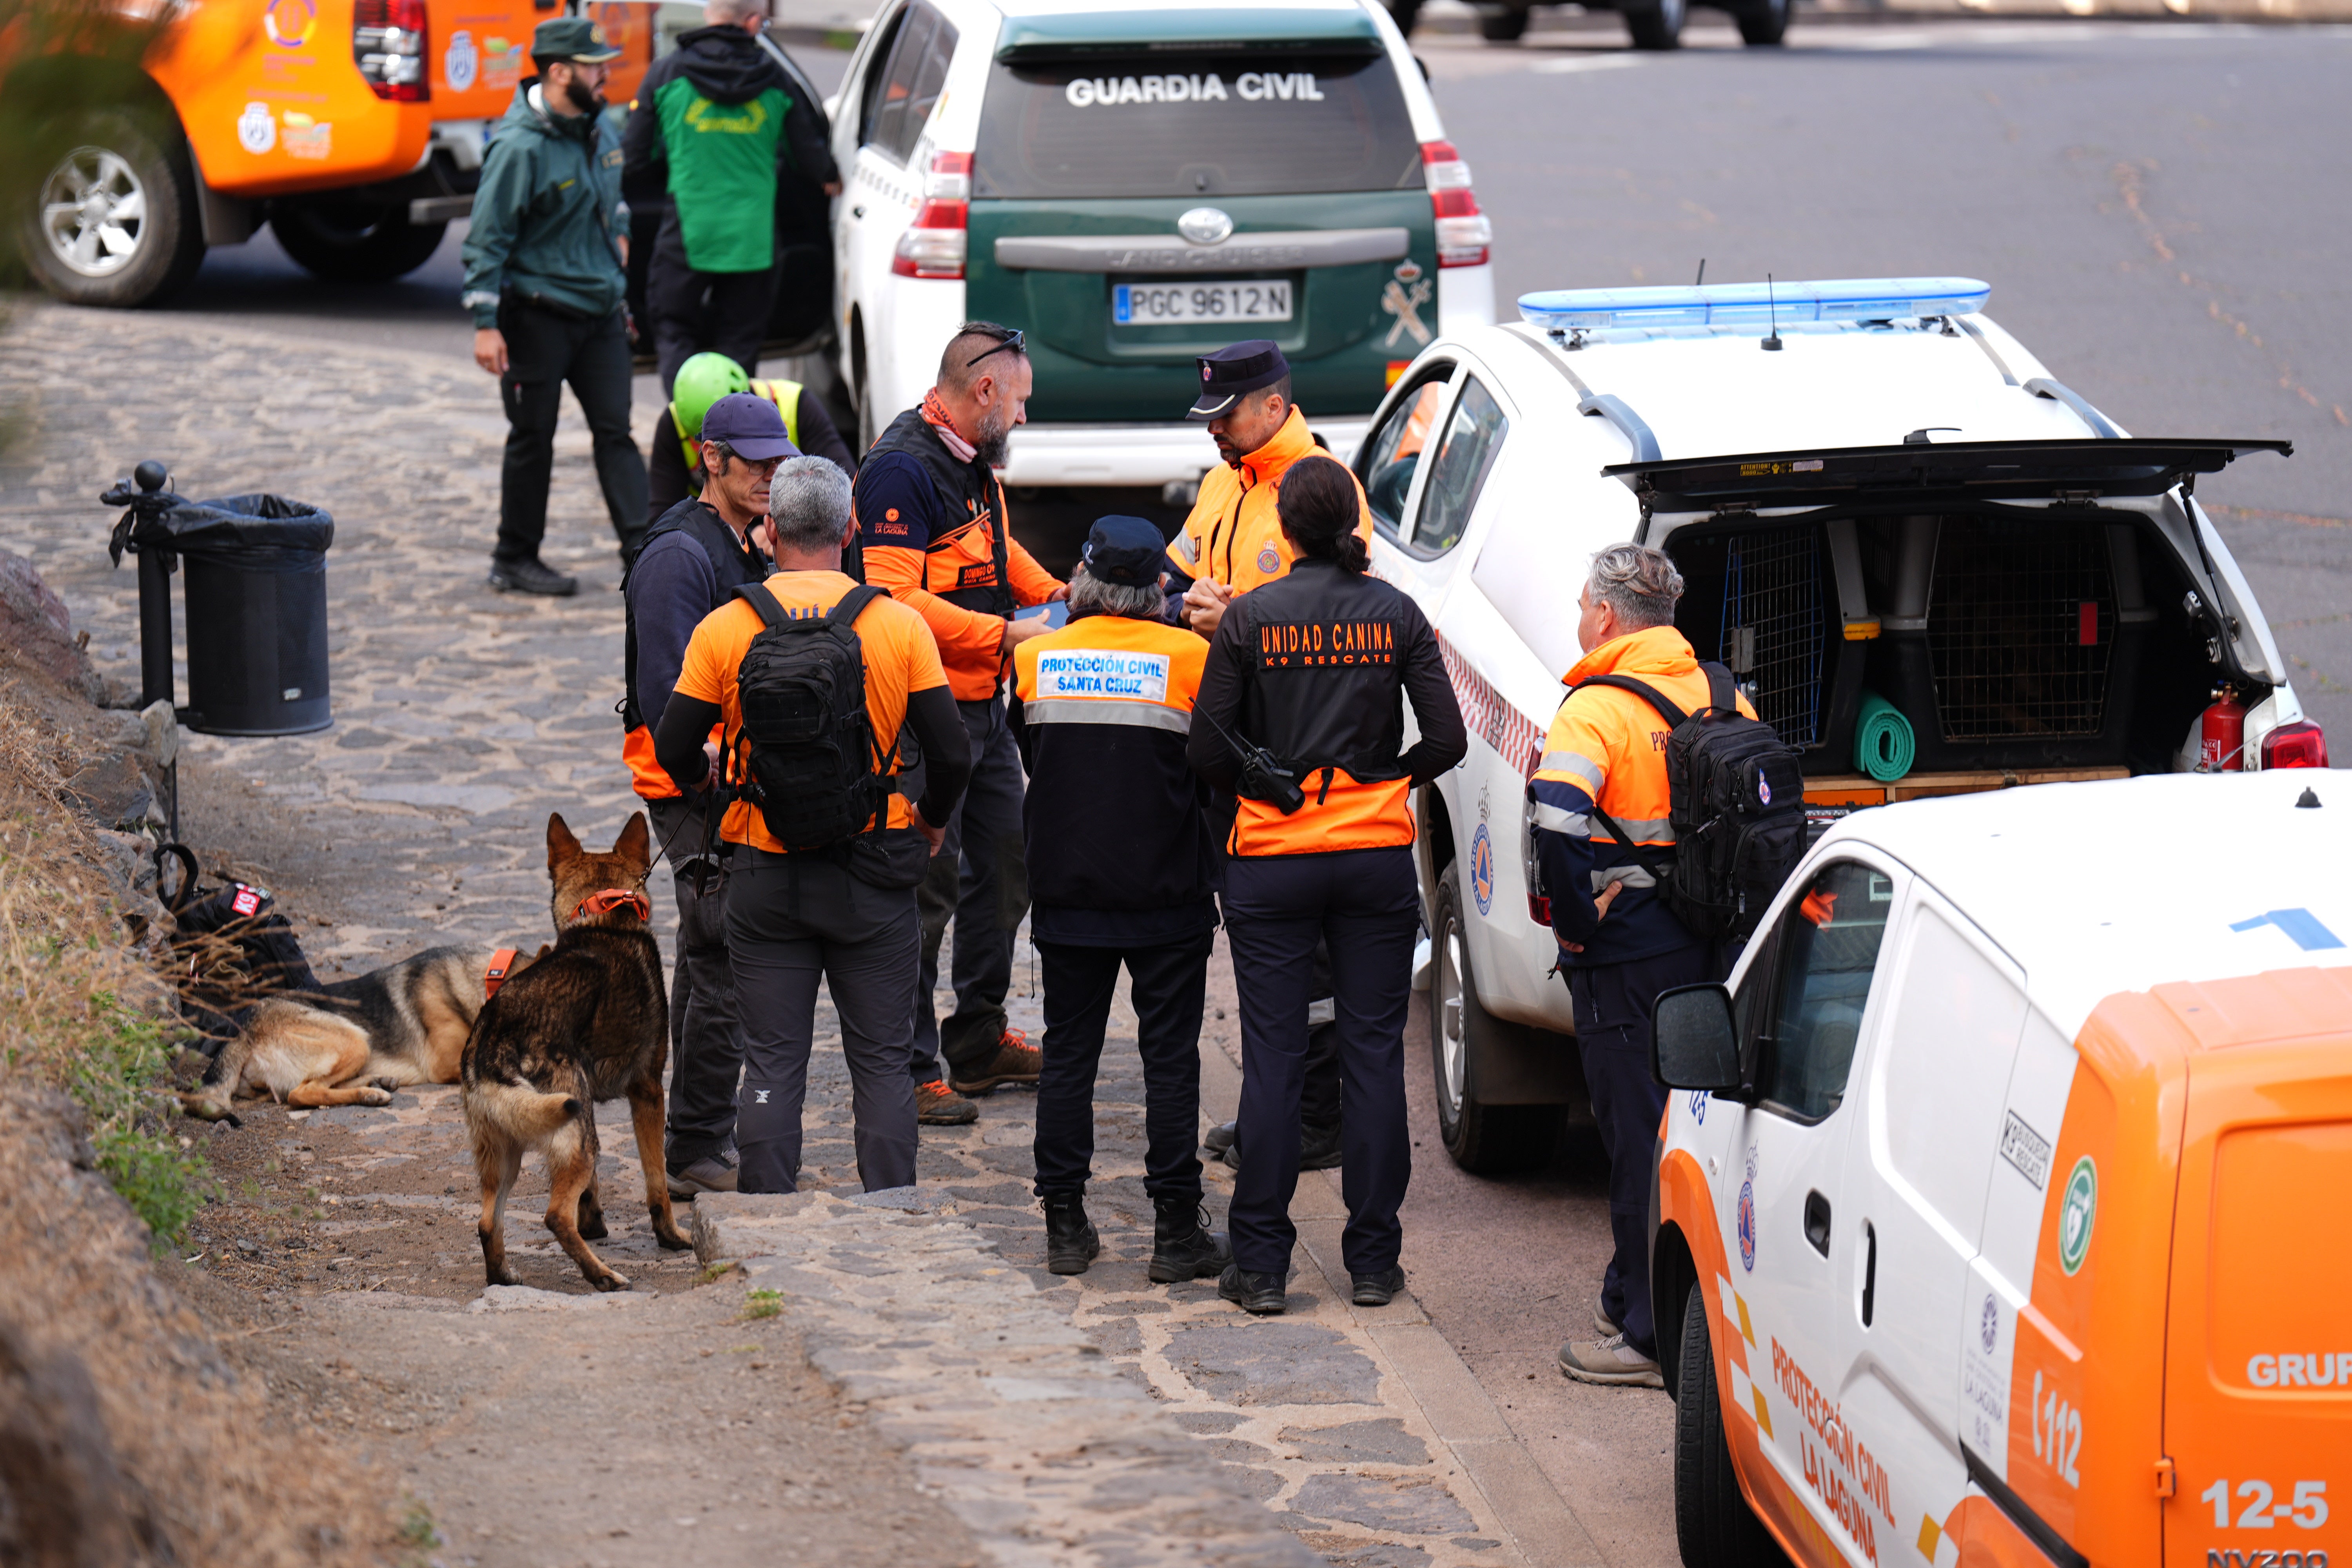 Search and rescue teams near the village of Masca, Tenerife, where the search for the missing British teenager continues for a sixth day